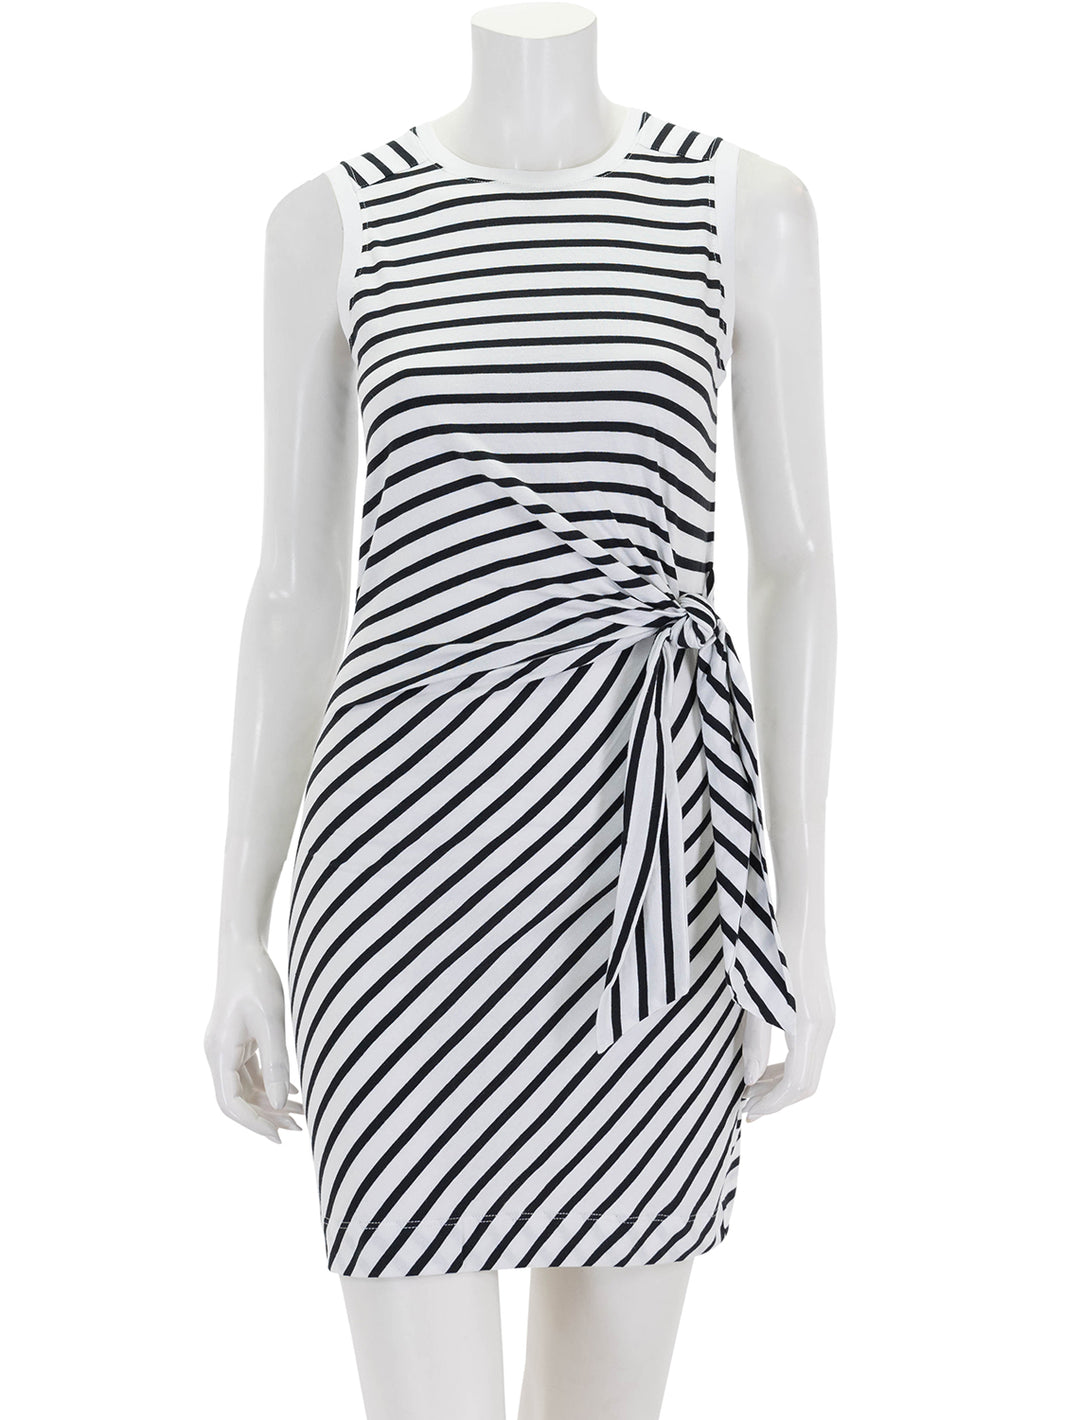 Front view of ATM's classic jersey stripe sleeveless twist dress.